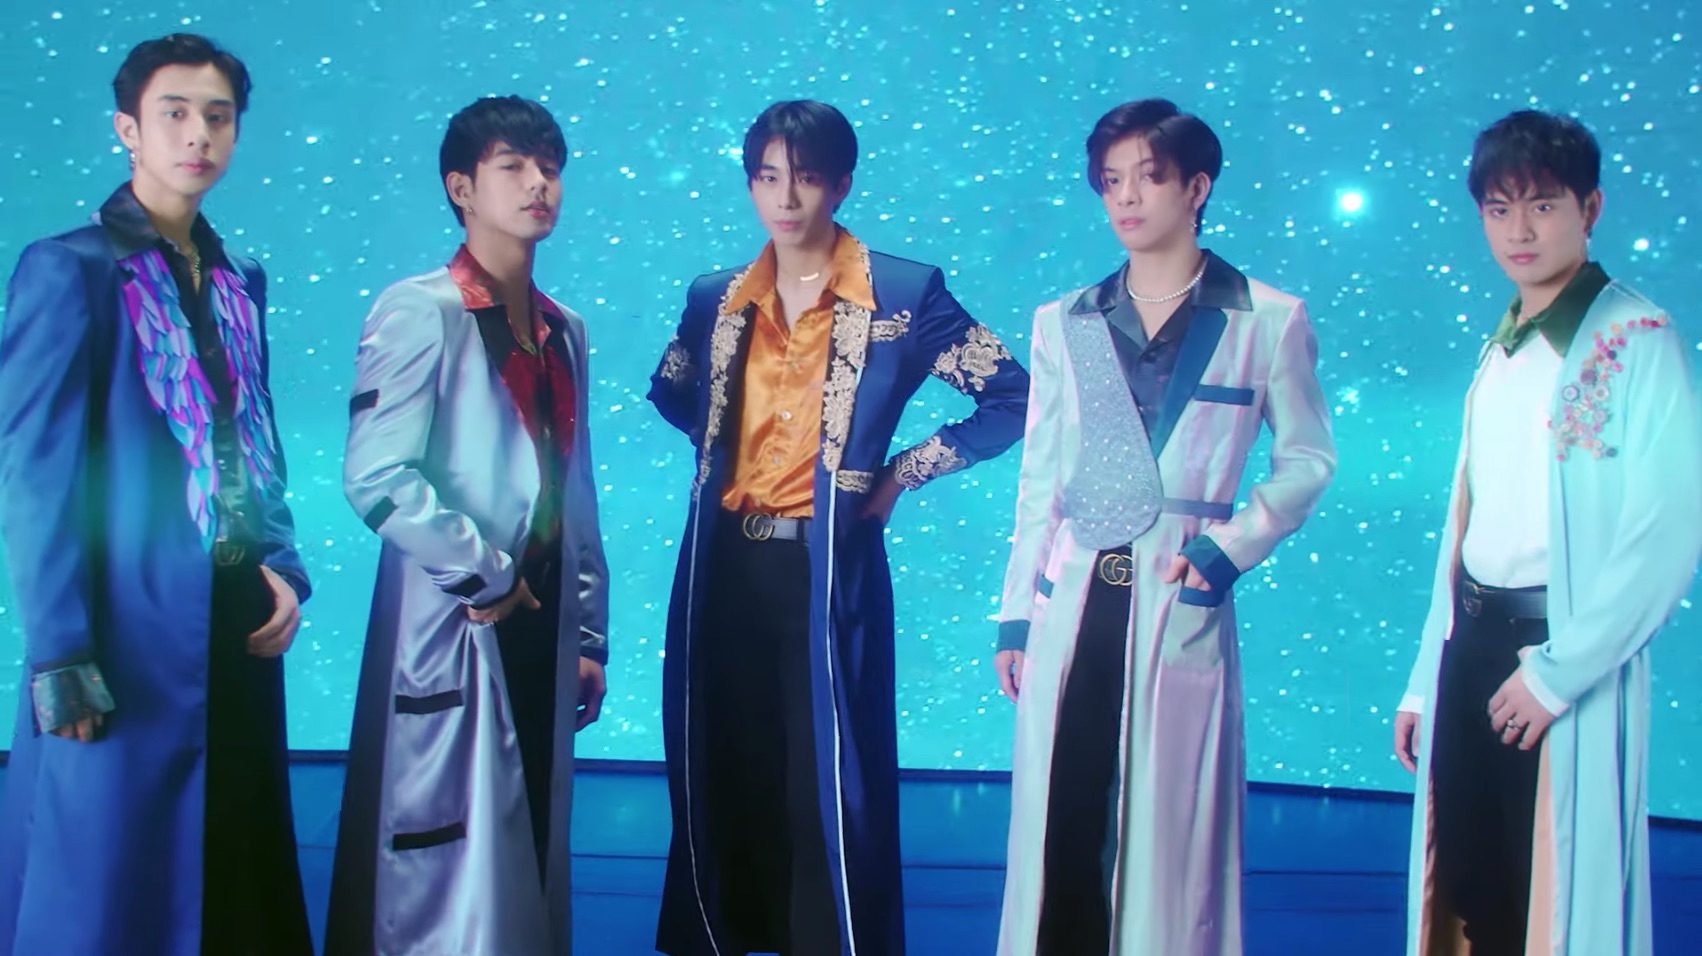 WATCH: New P-pop group BGYO debuts with ‘The Light’